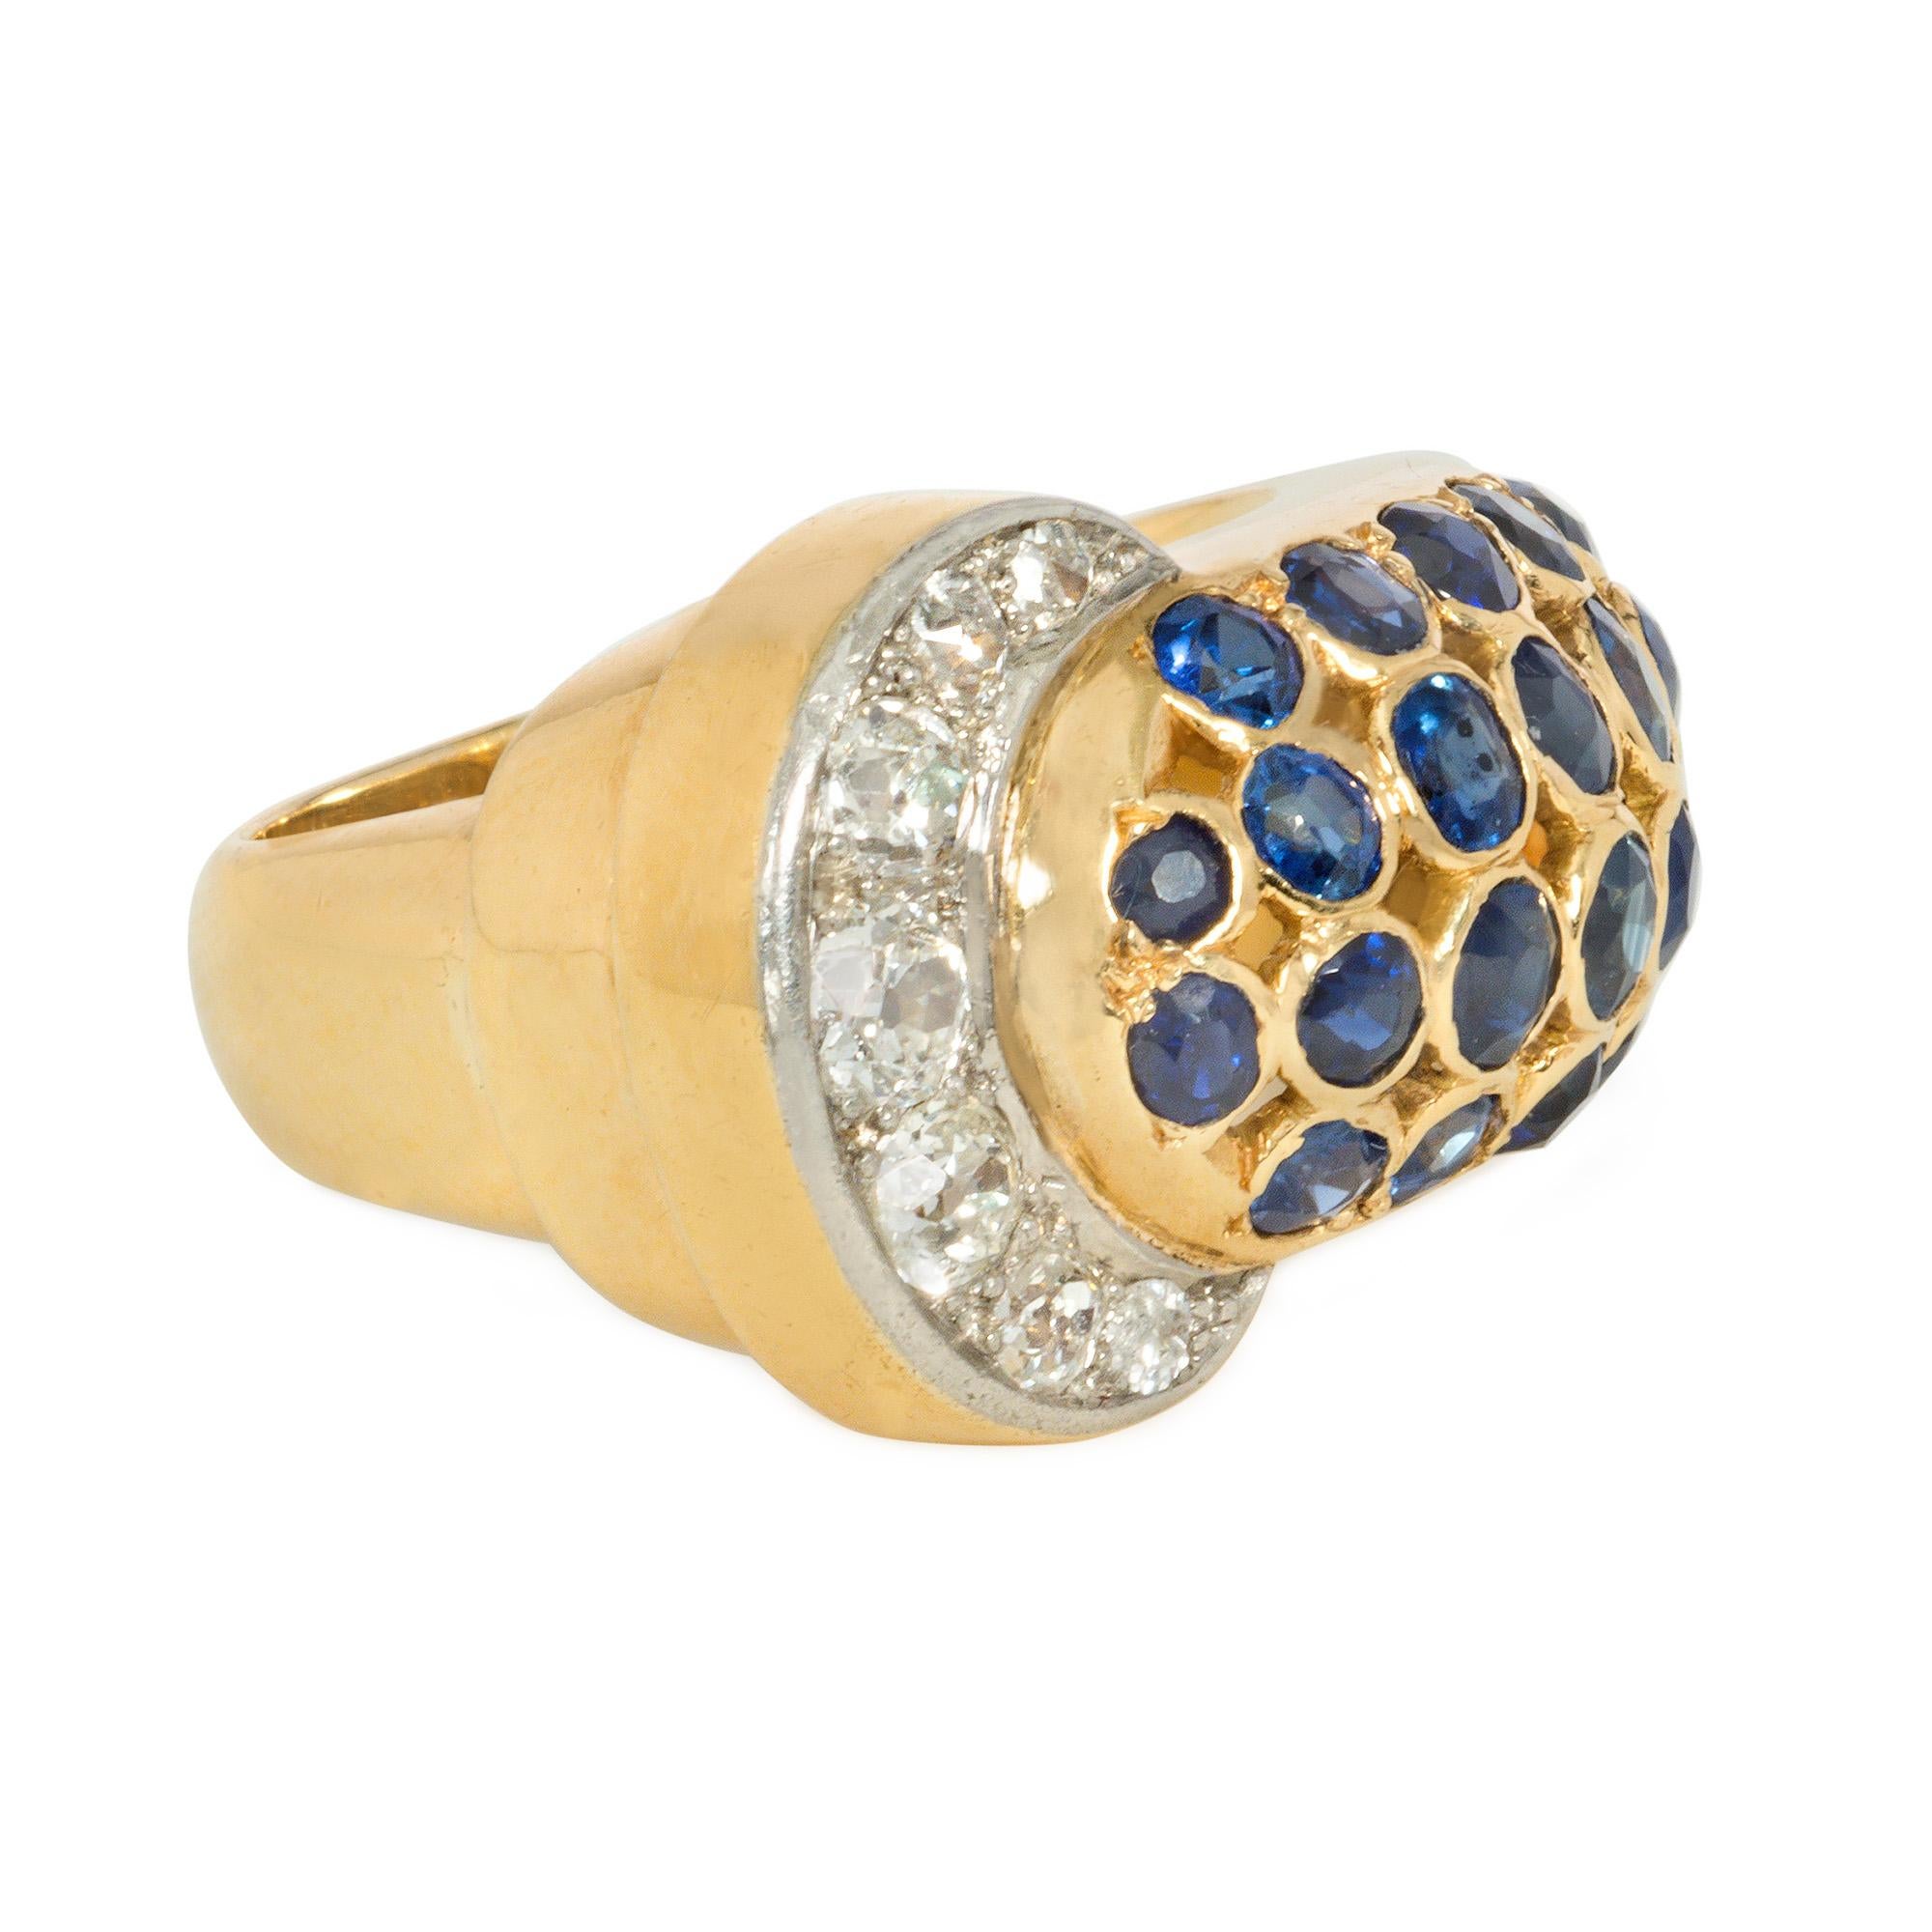 A Mid-Century sapphire, diamond, and gold band-style ring of stylized belt strap design, comprised of four rows of bezel-set sapphires ending in a crescent-shaped, diamond-set buckle, in 18k and platinum.

* Includes Kentshire's letter of